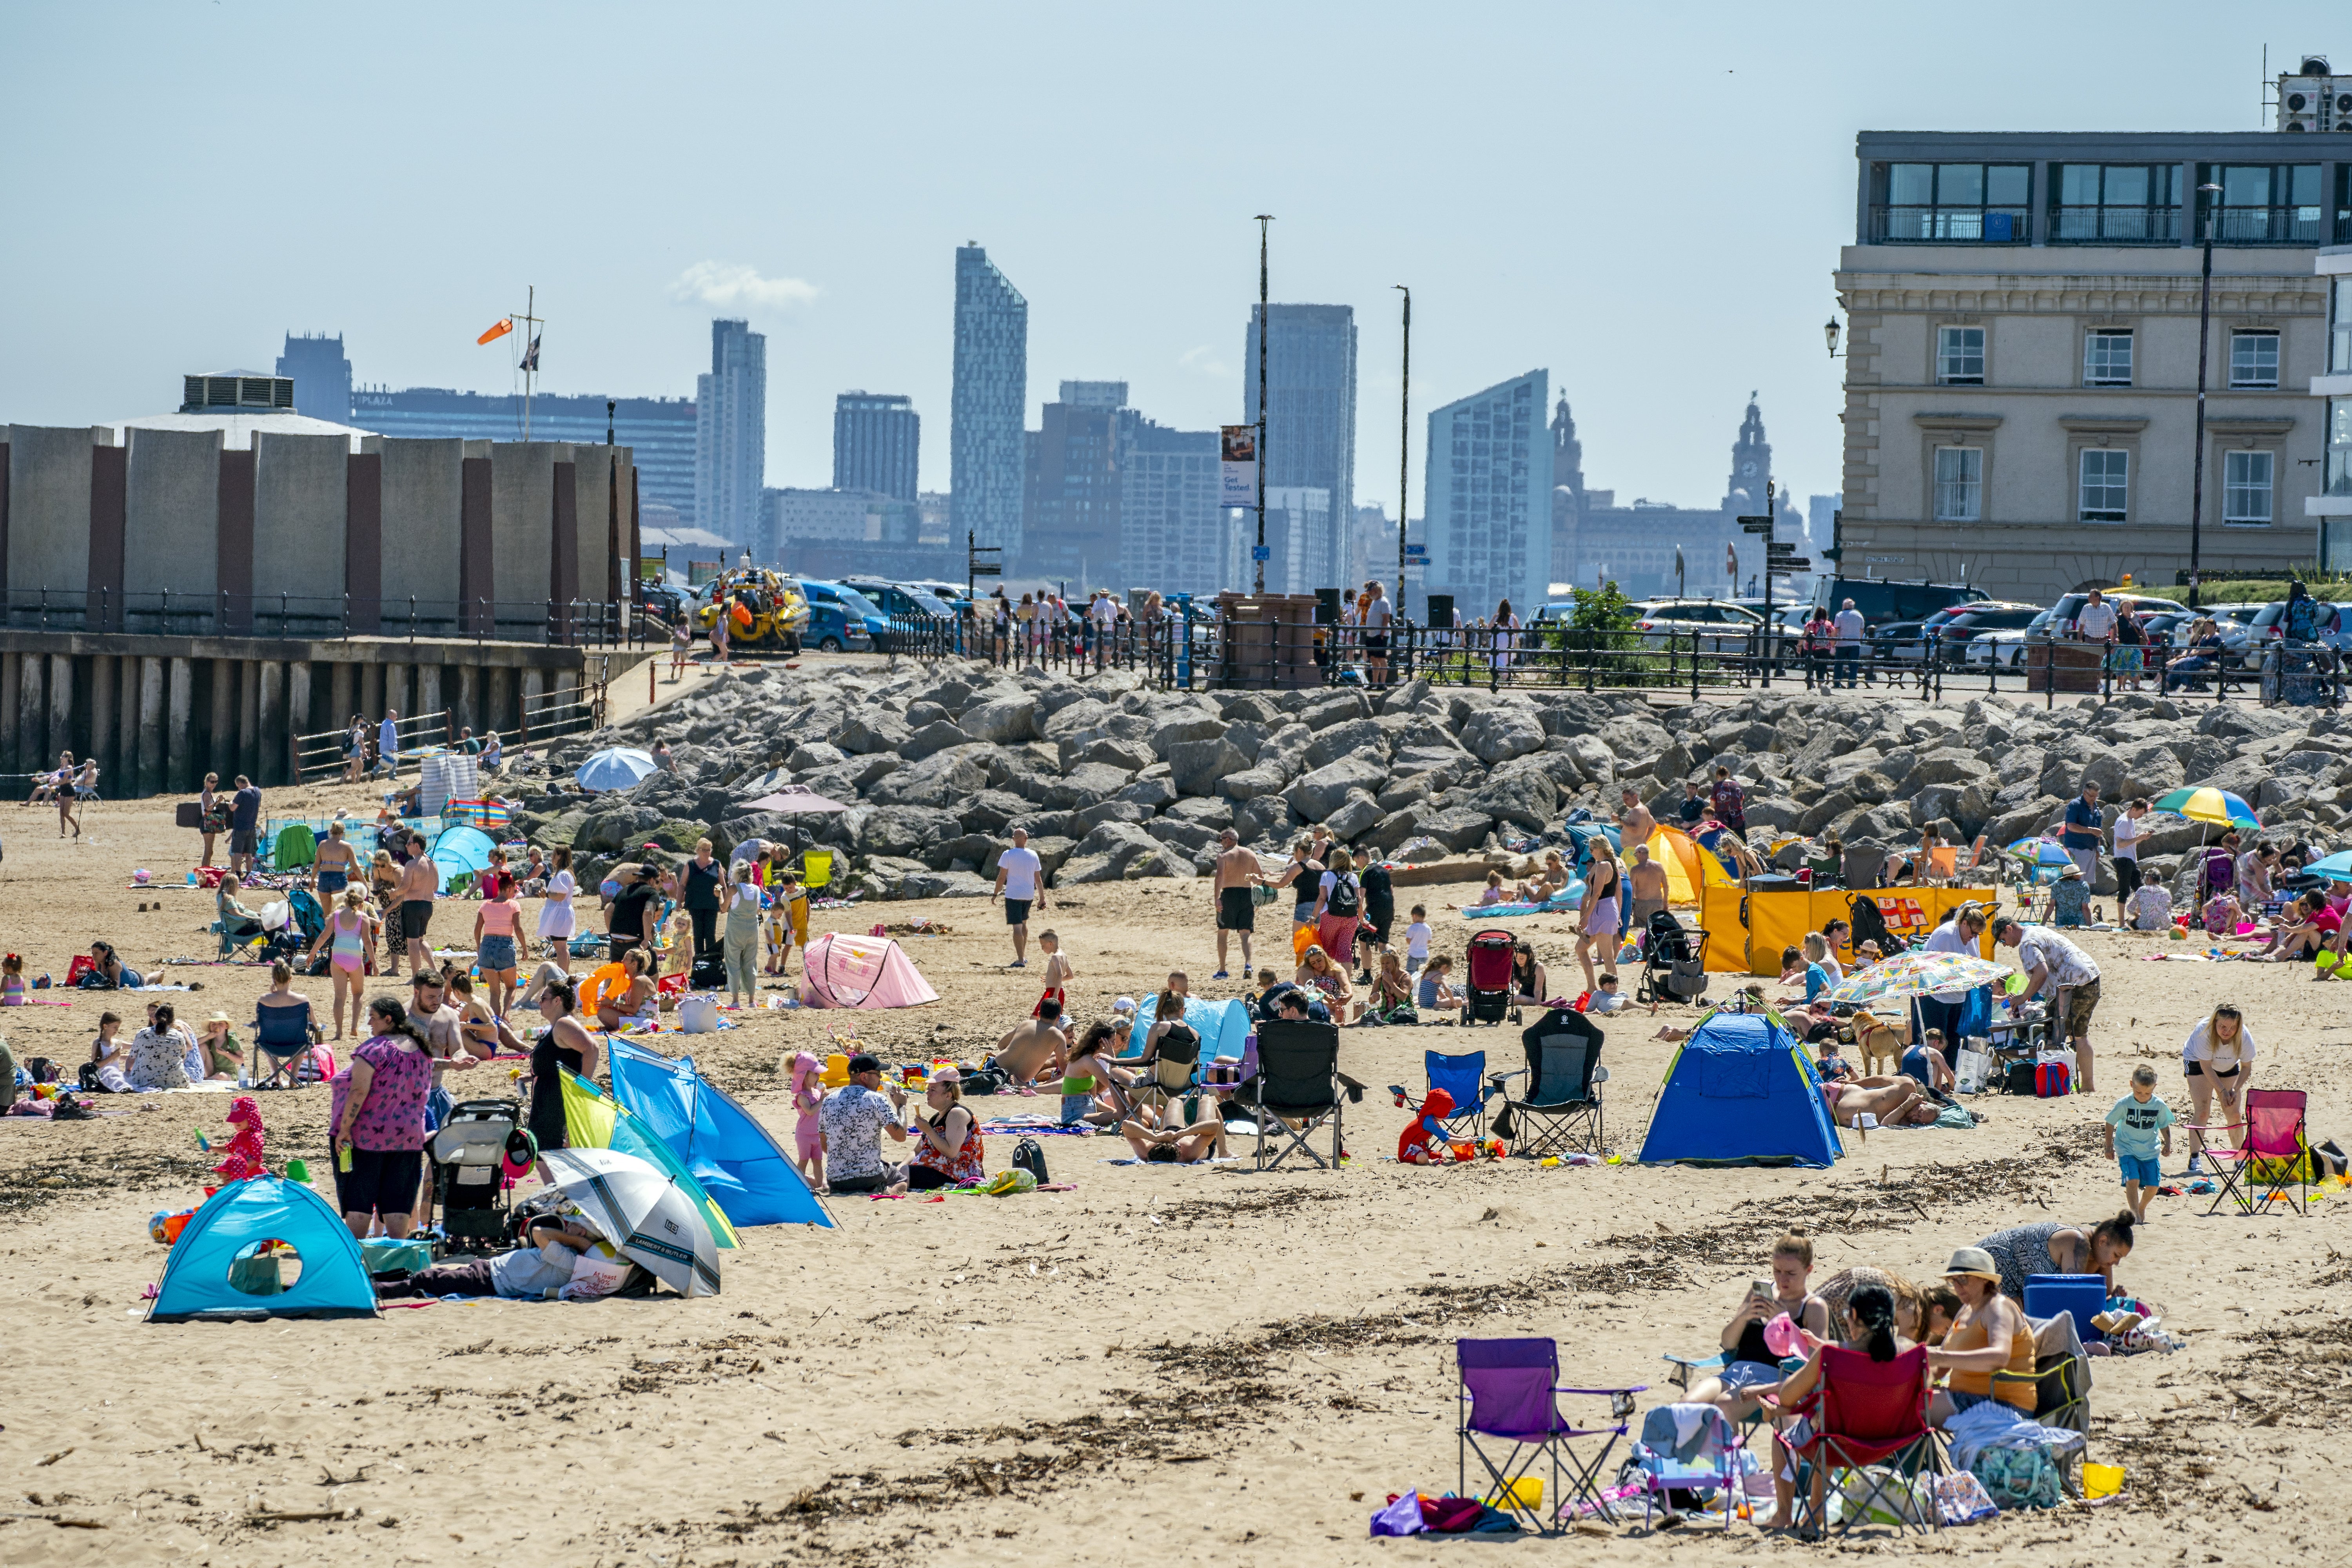 Sunbathers make the most of the mini heatwave in New Brighton, Wirral (Peter Byrne/PA)